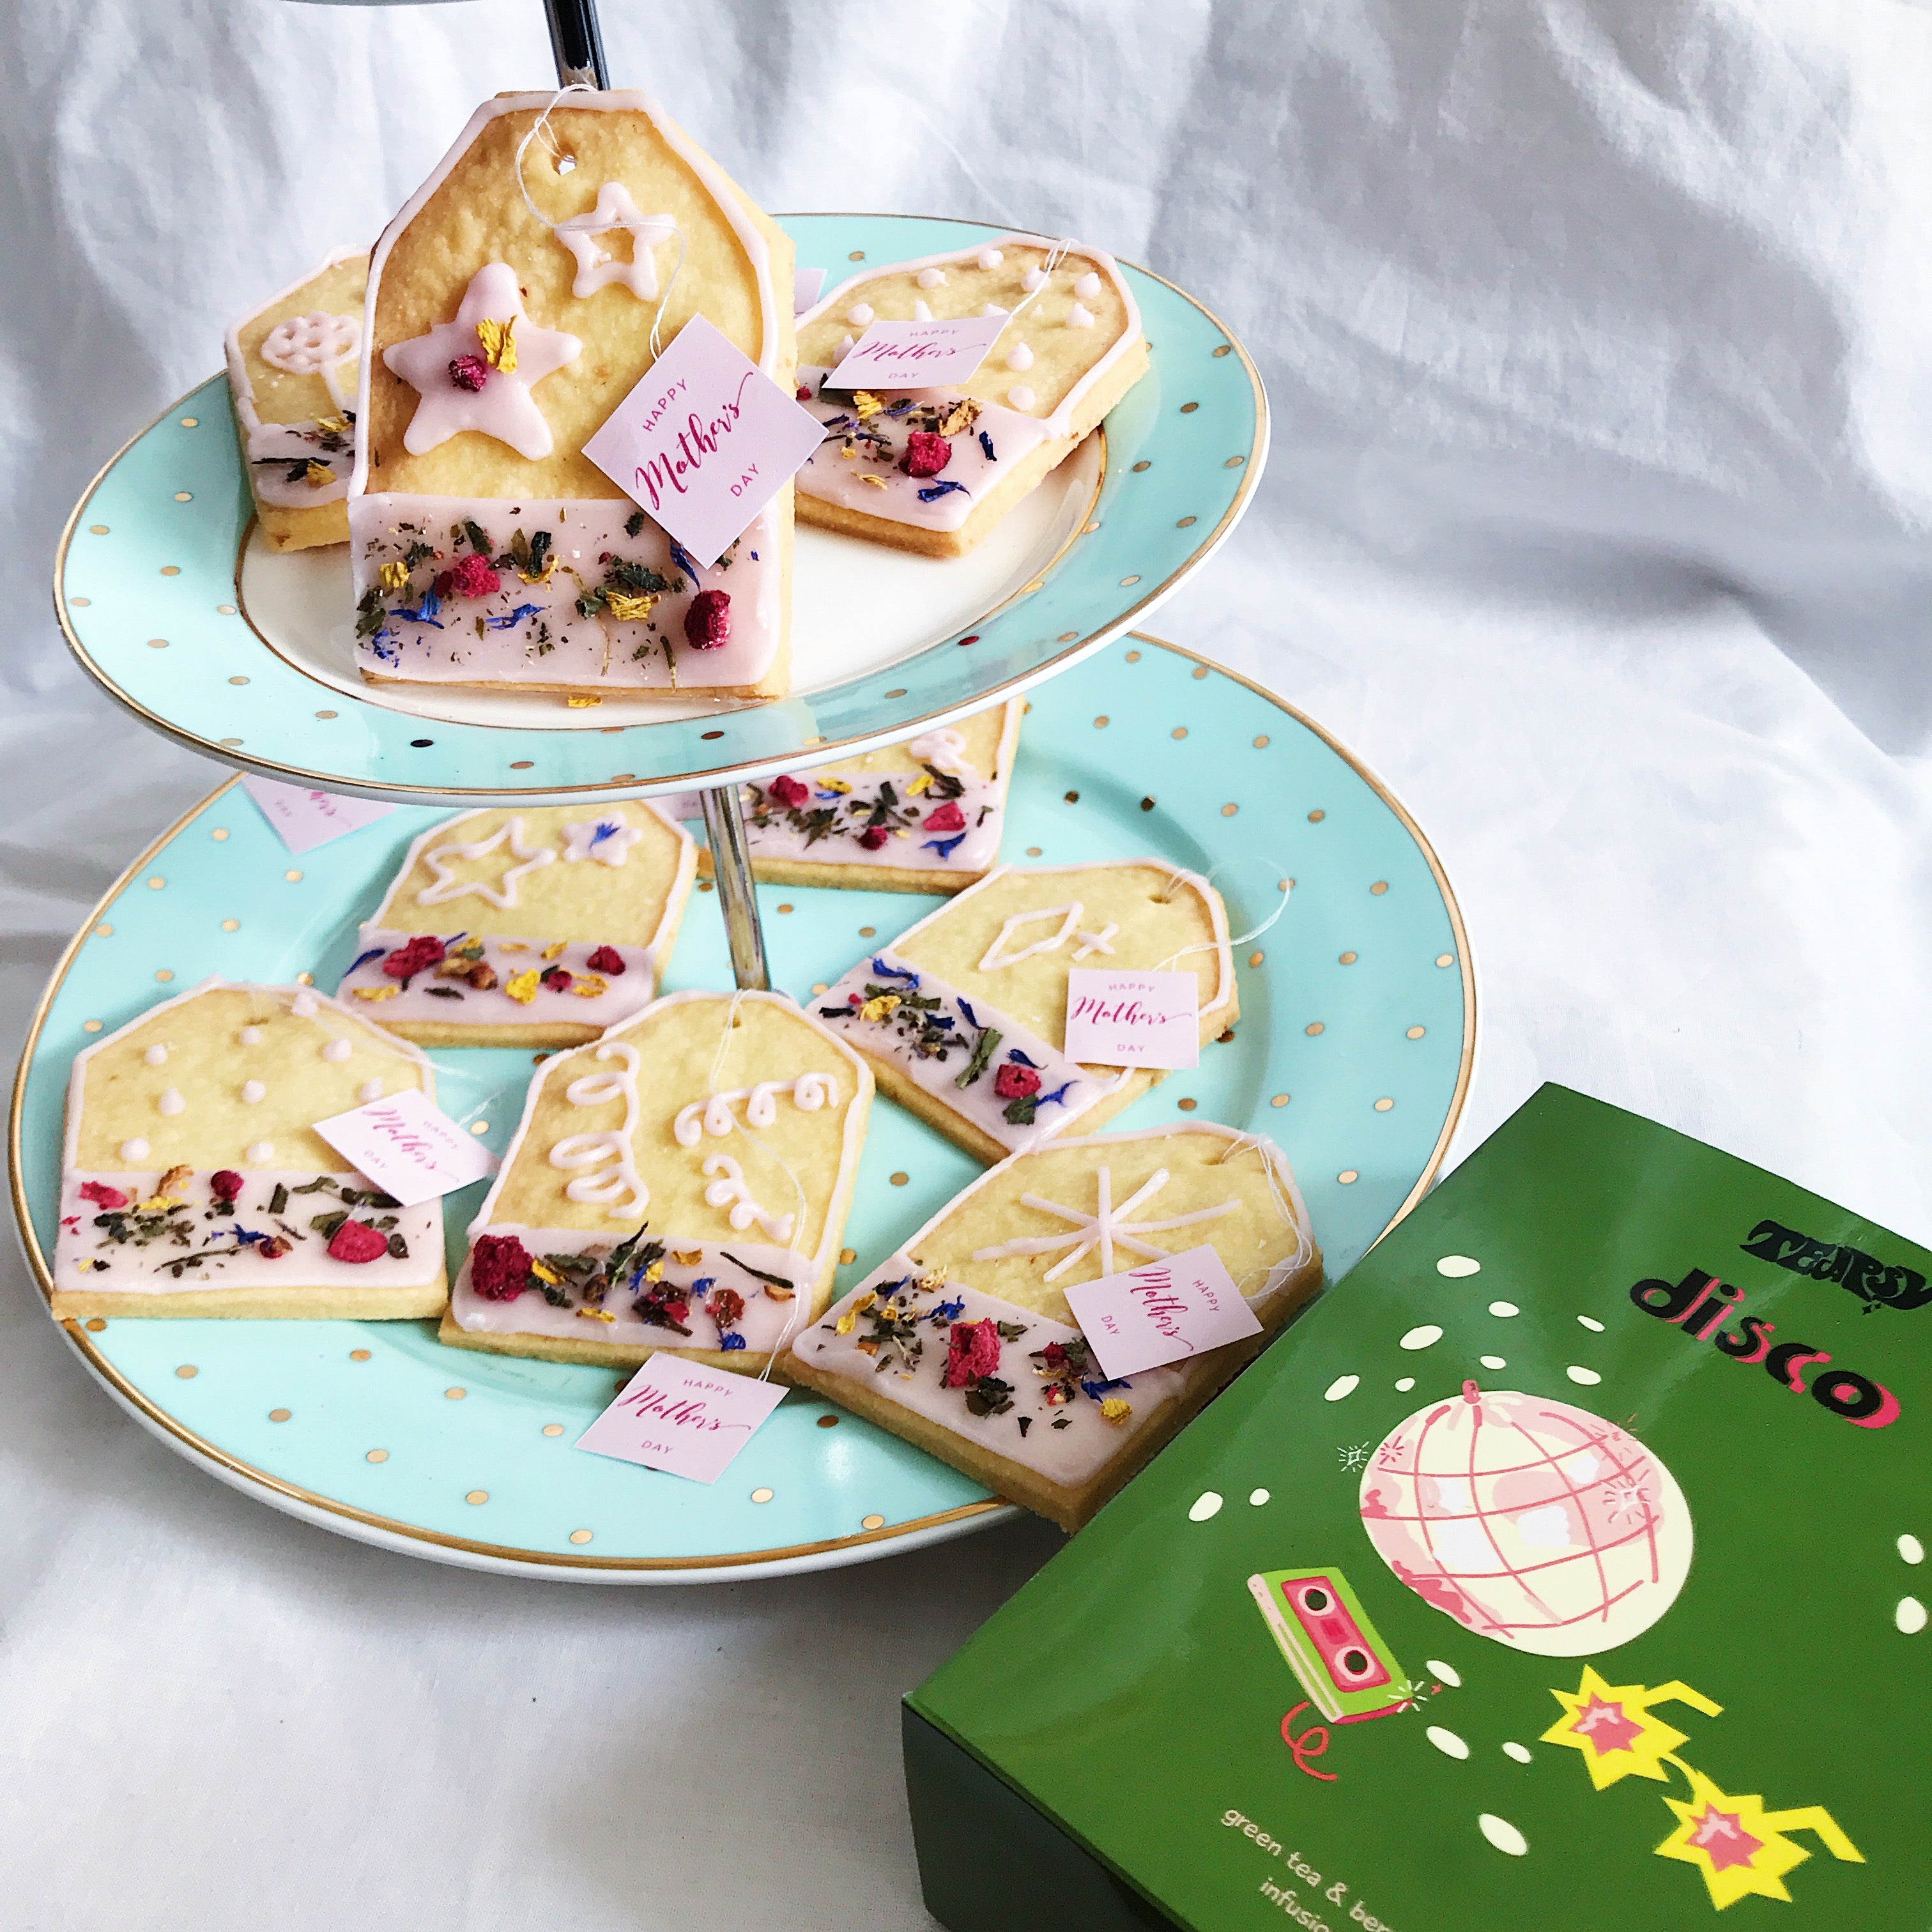 Lemon and Rose biscuits with Disco tea icing